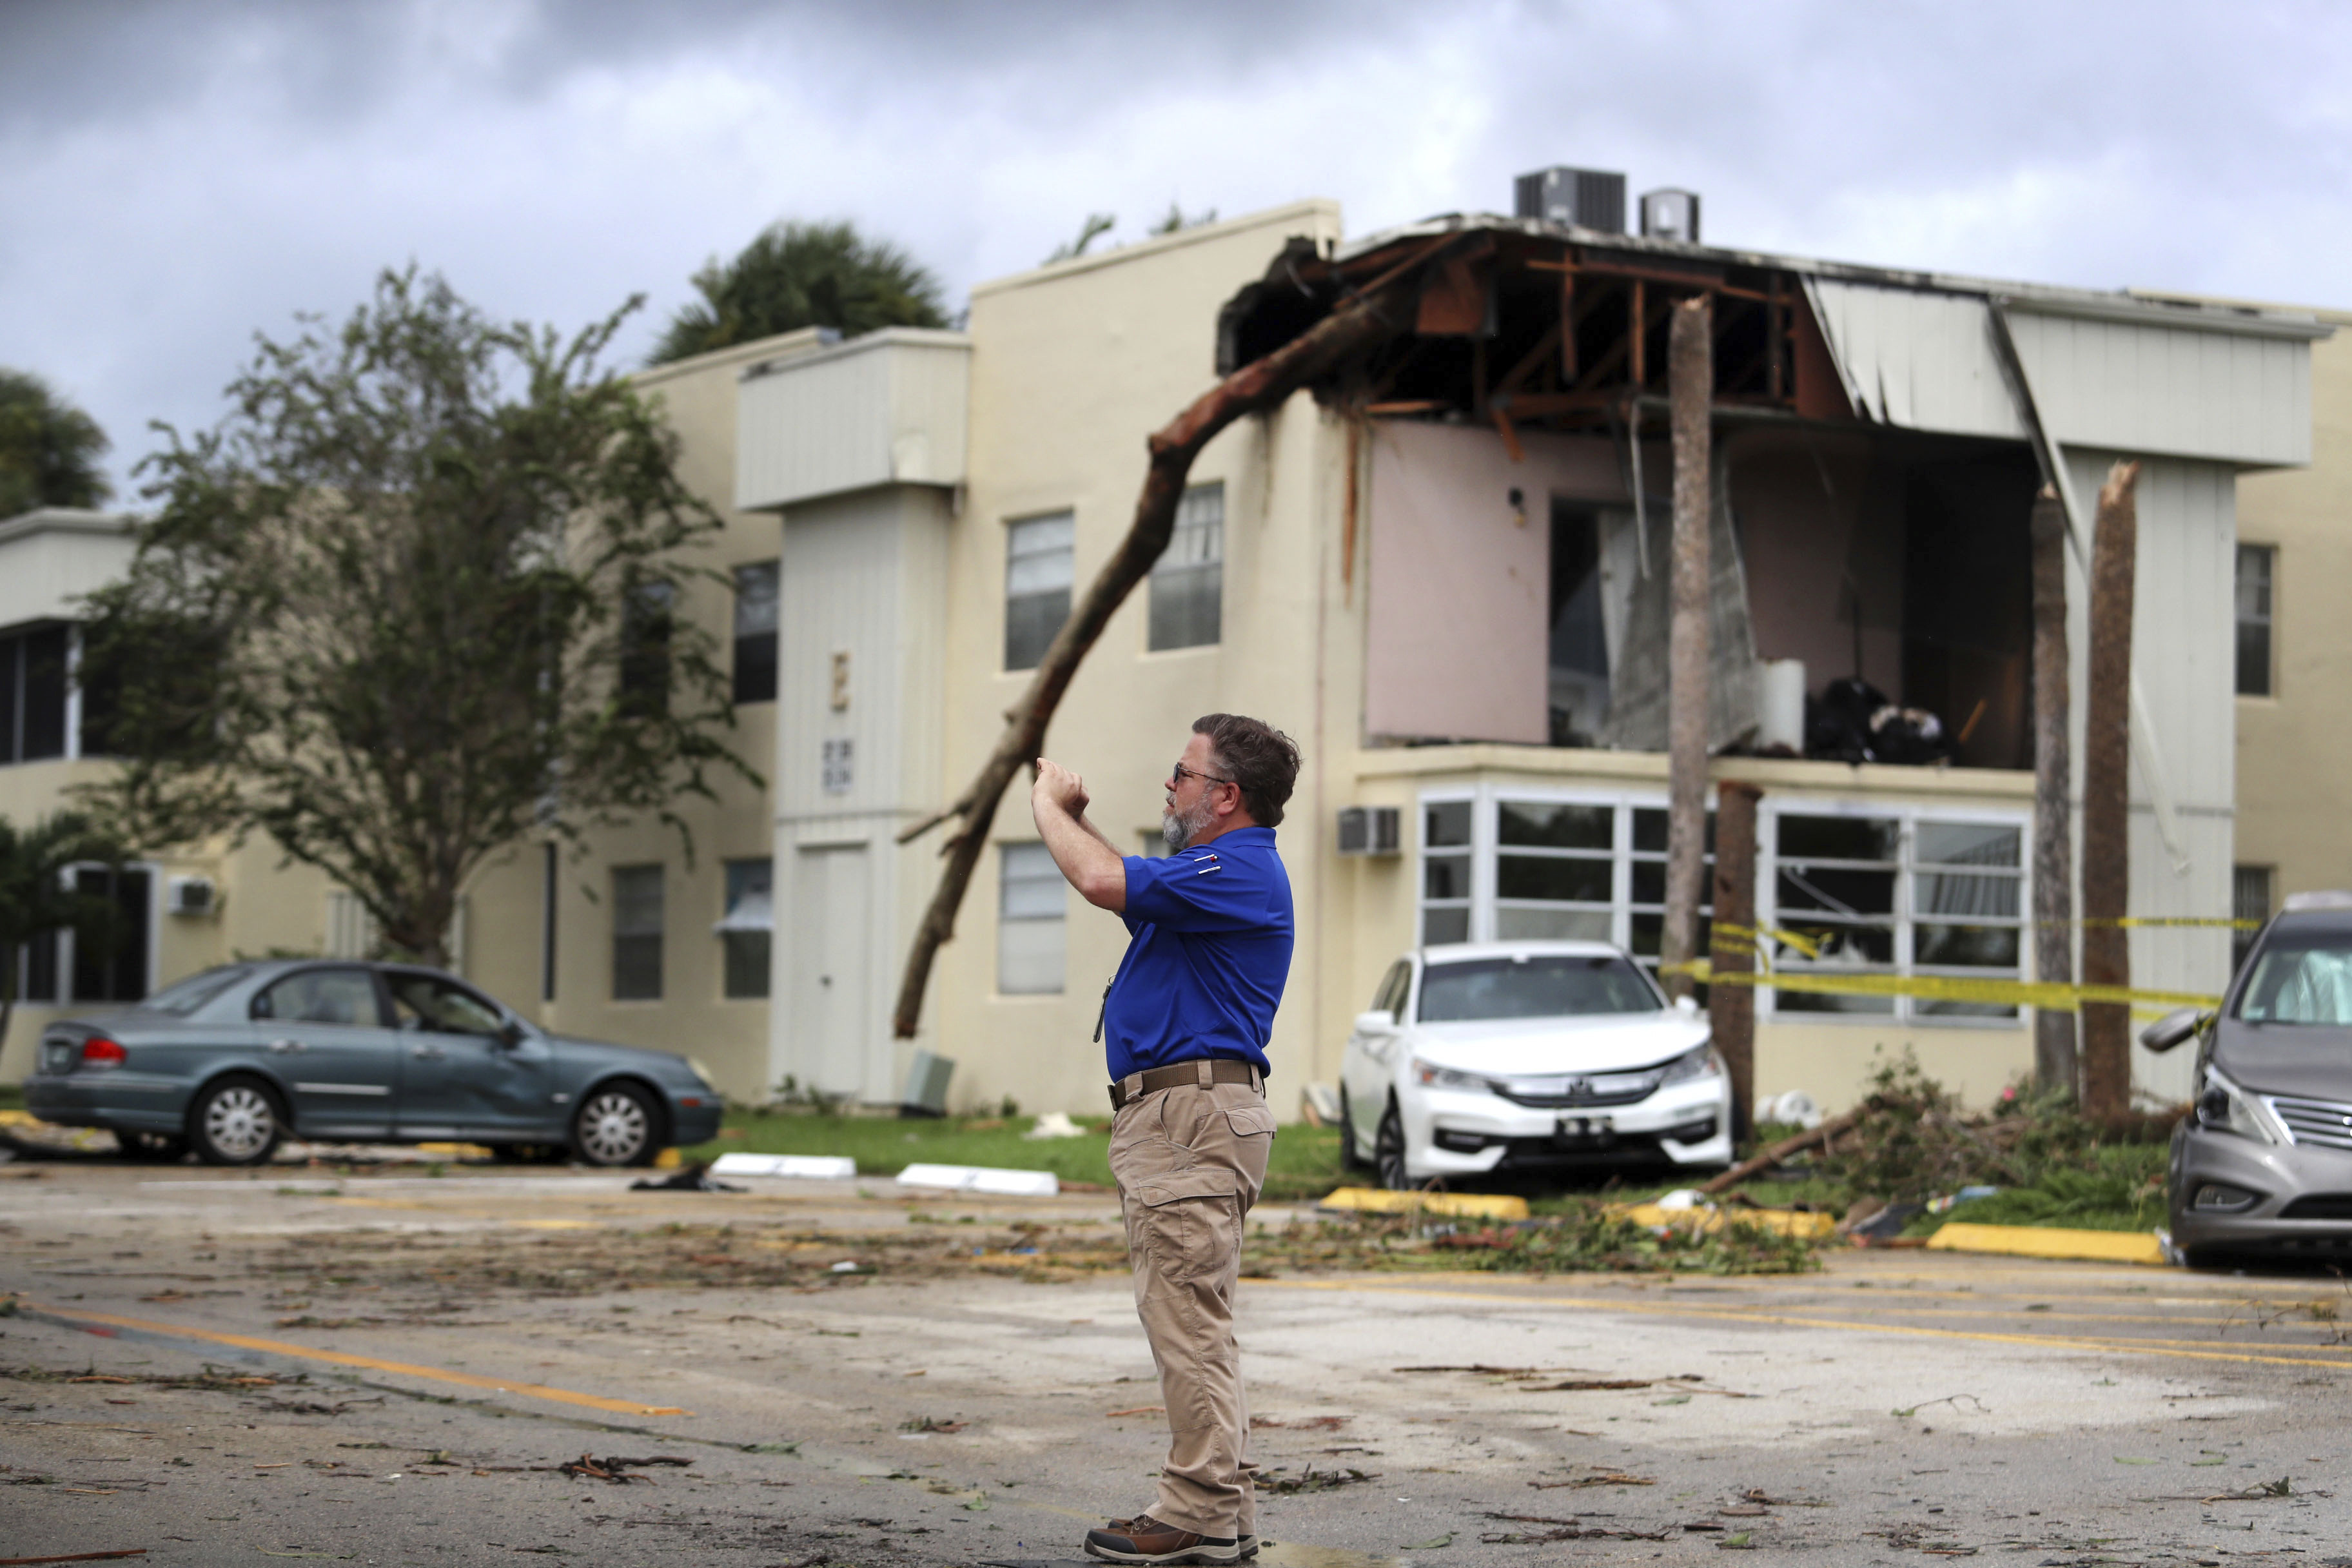 David Dellinger with the National Weather Service surveys the damage from an apparent overnight tornado spawned from Hurricane Ian at Kings Point 55+ community in Delray Beach, Florida